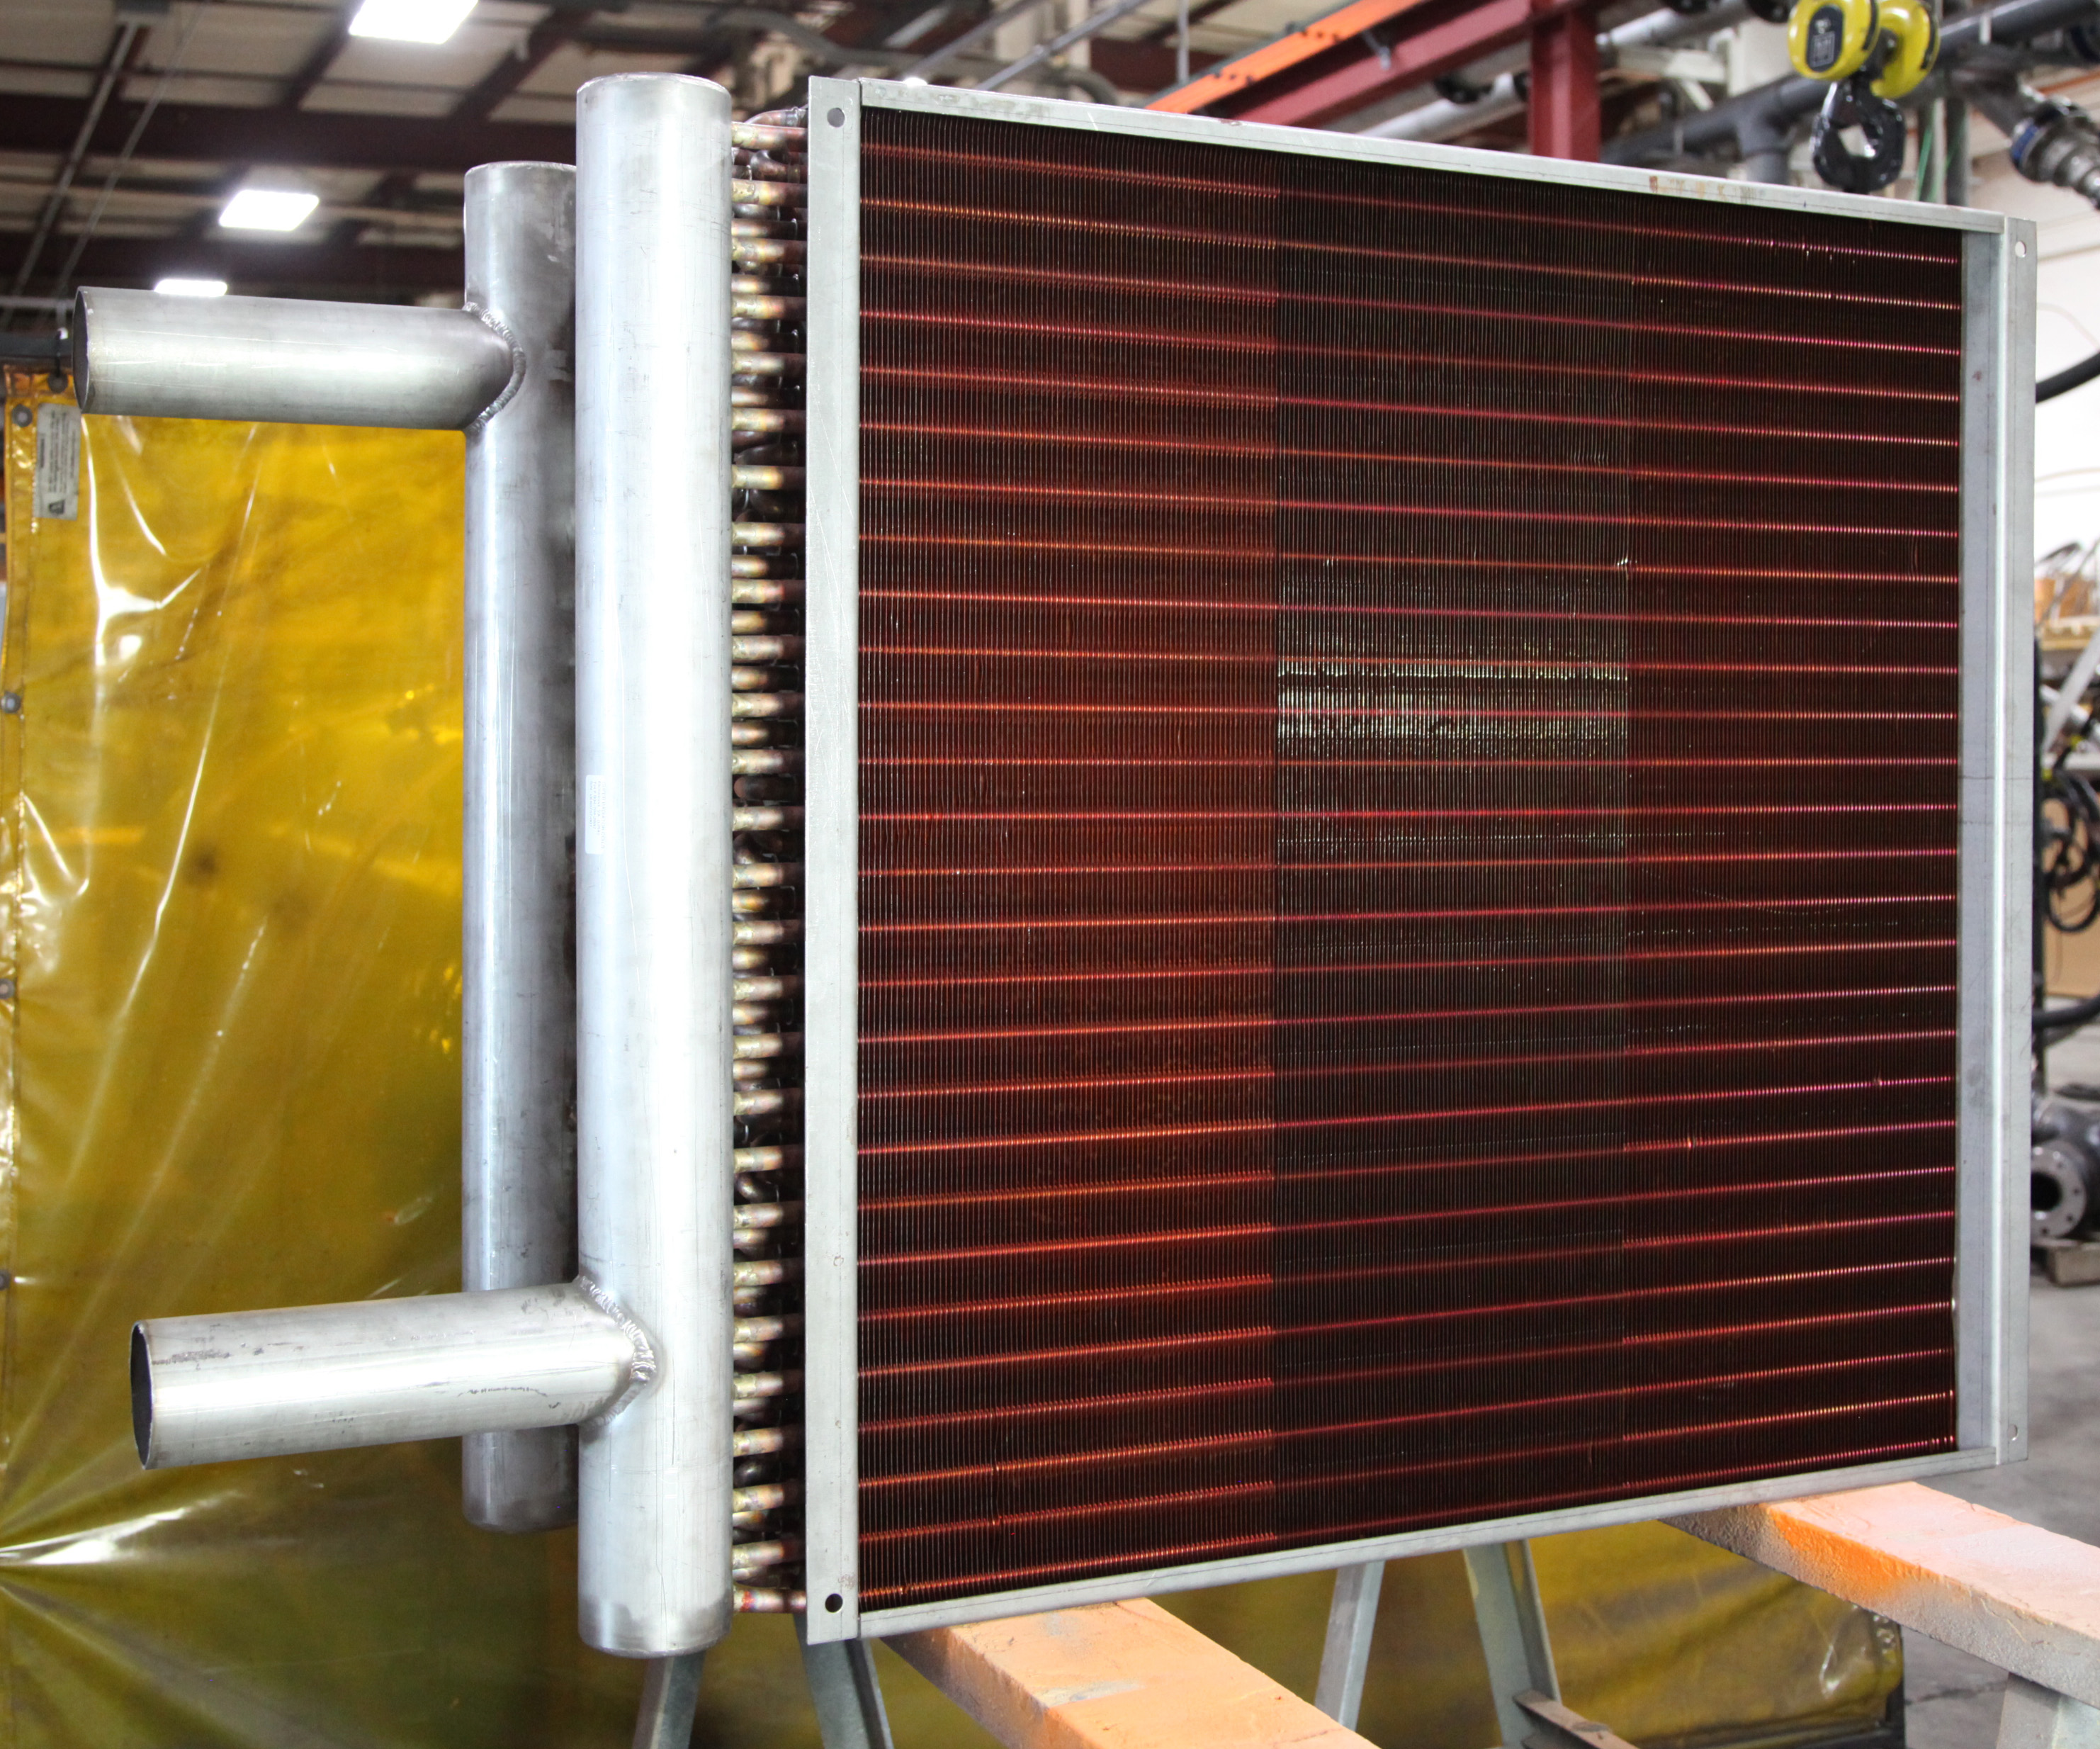 heat exchanger cleaning process